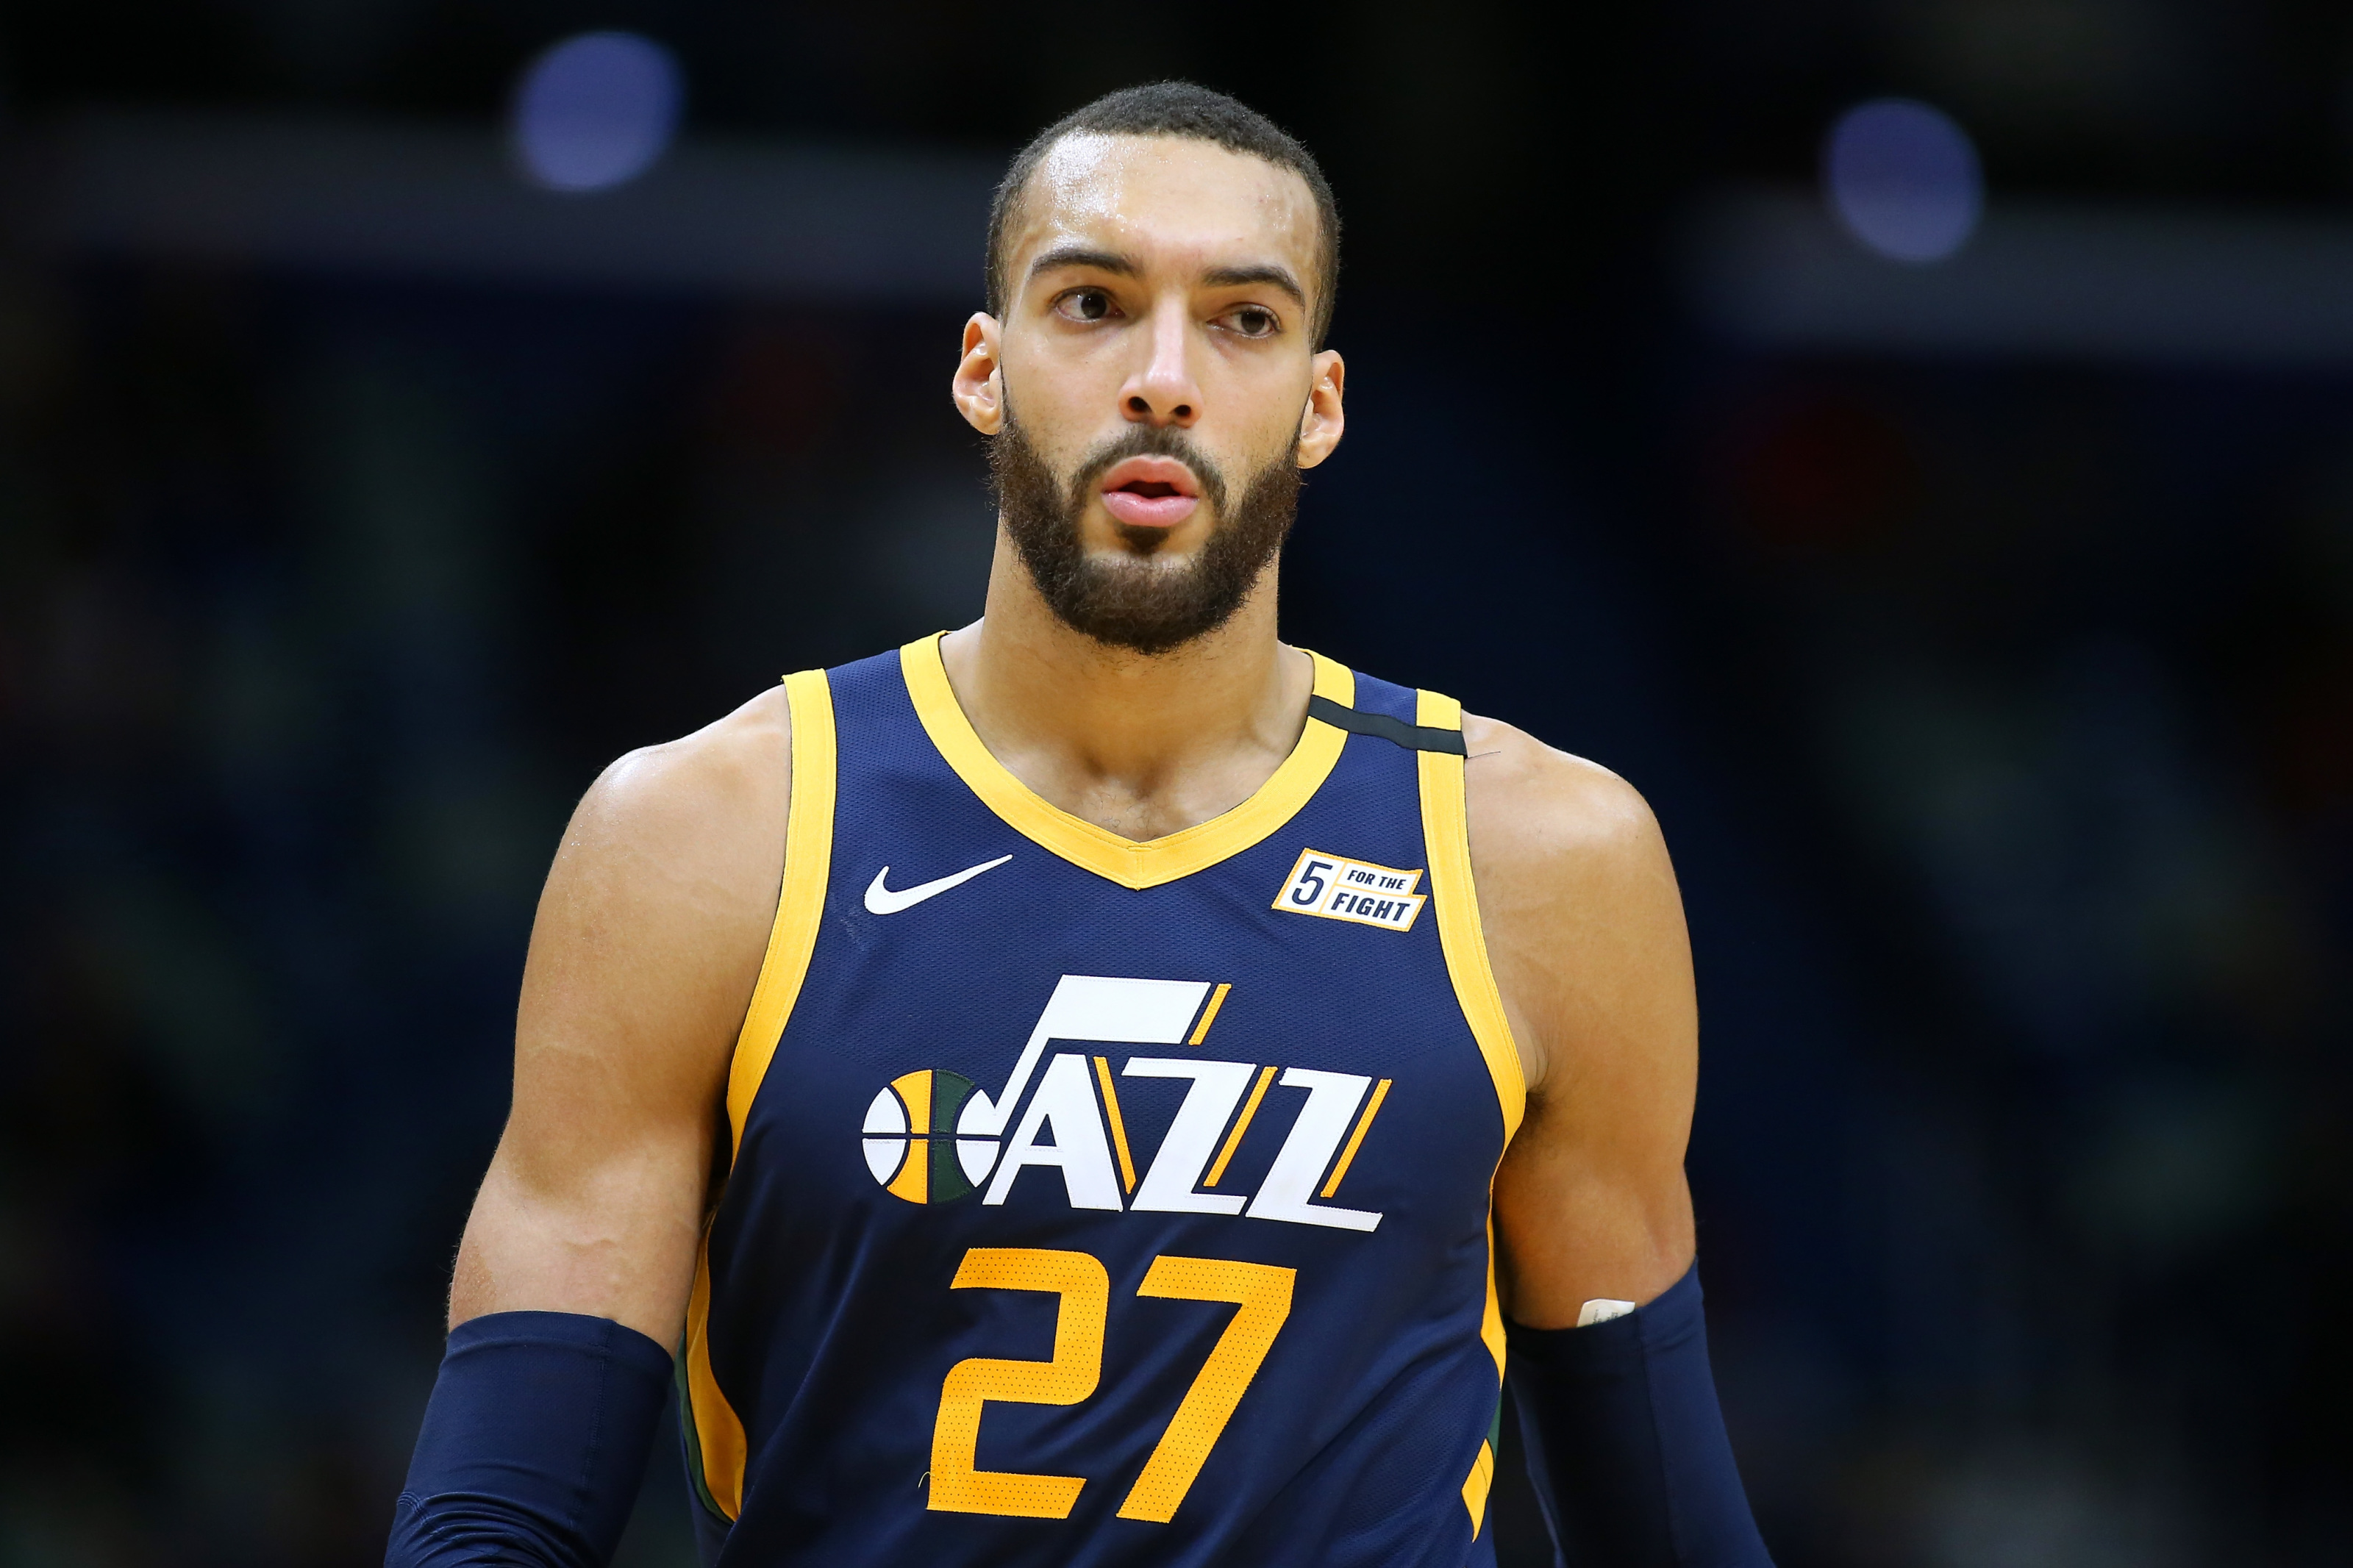 Utah Jazz: What's gone wrong with Rudy Gobert lately?